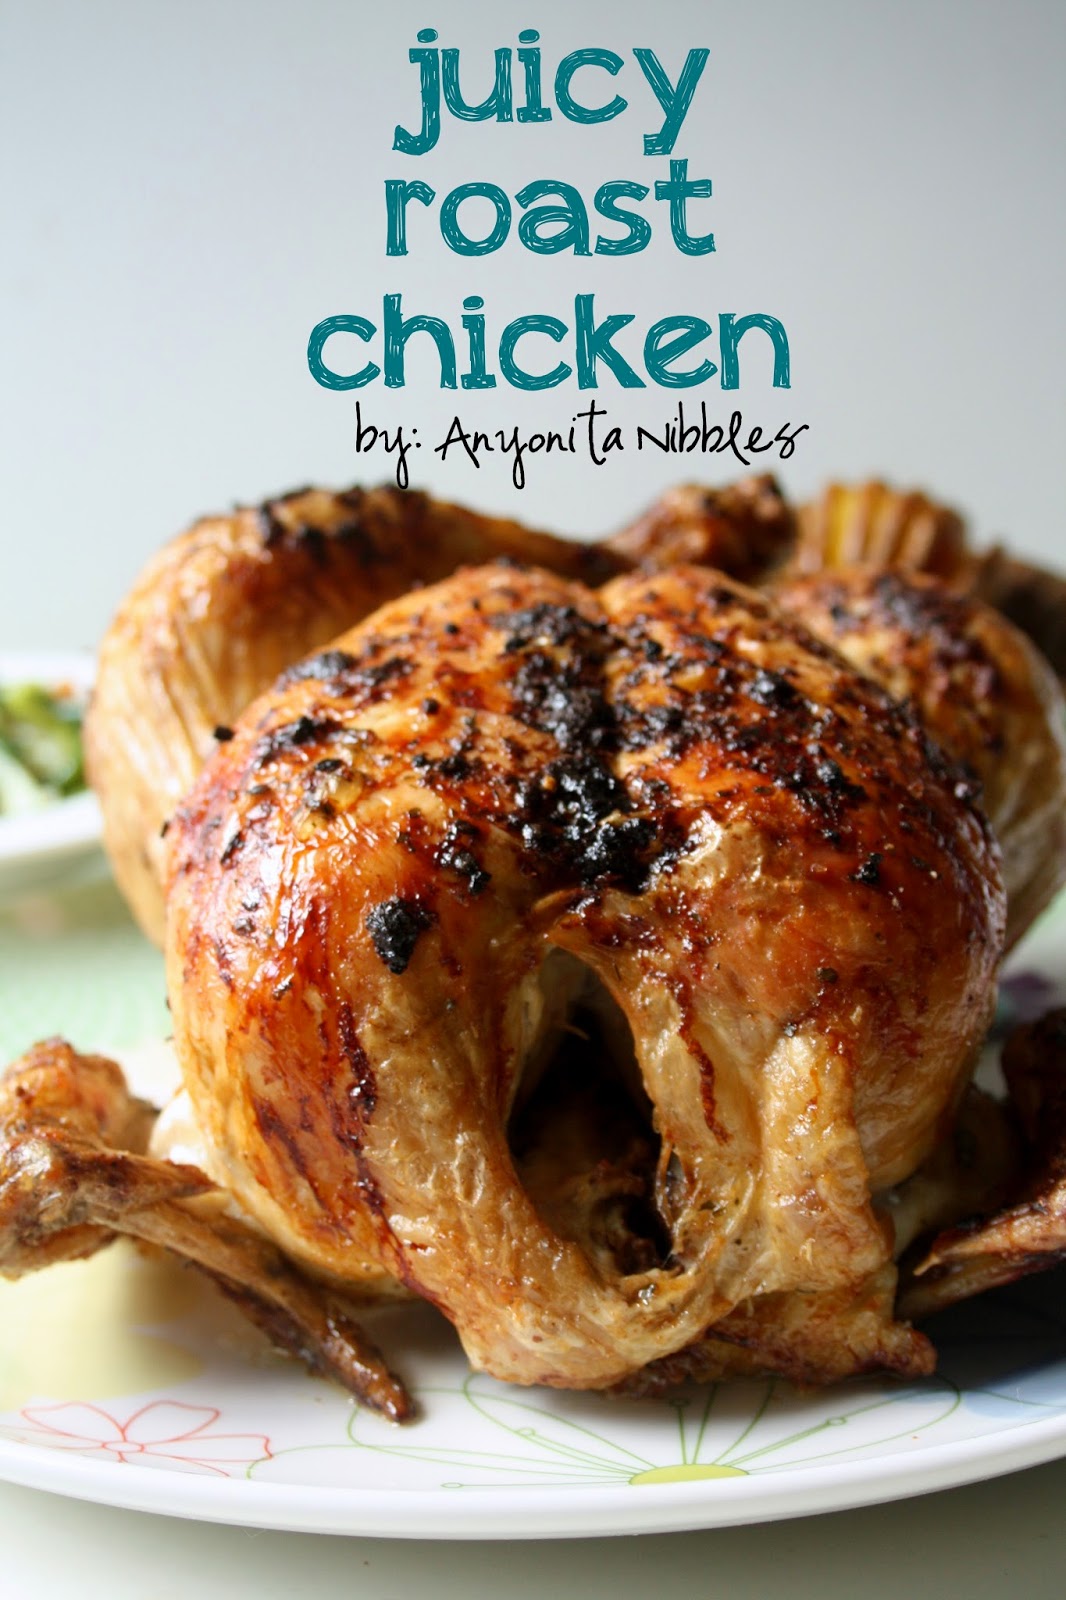 Juicy Roast Chicken for Mother's Day | Anyonita Nibbles